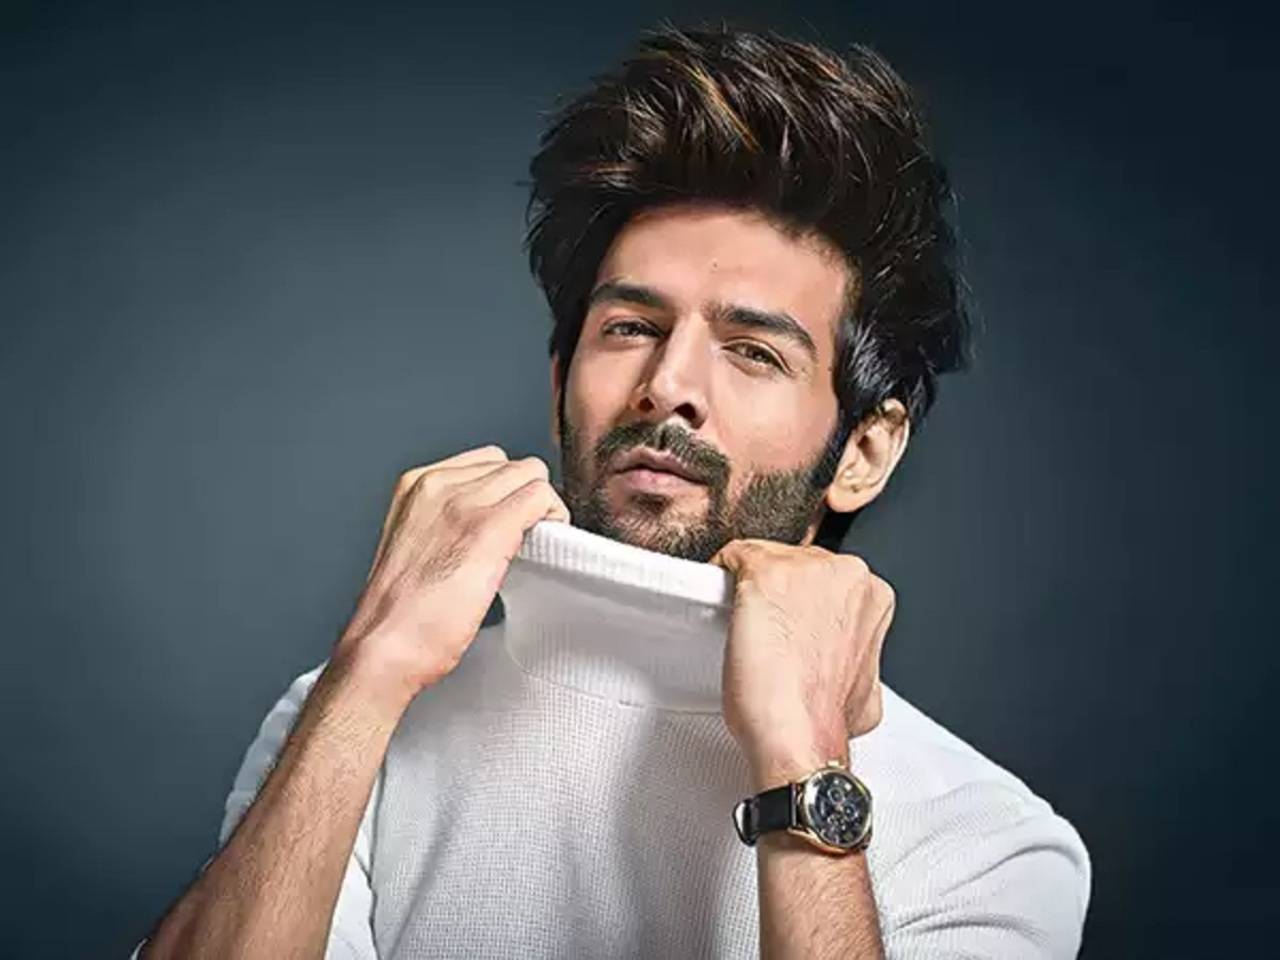 Kartik Aaryan joins the list of trendsetters in Bollywood with his hairstyle  | Hindi Movie News - Times of India